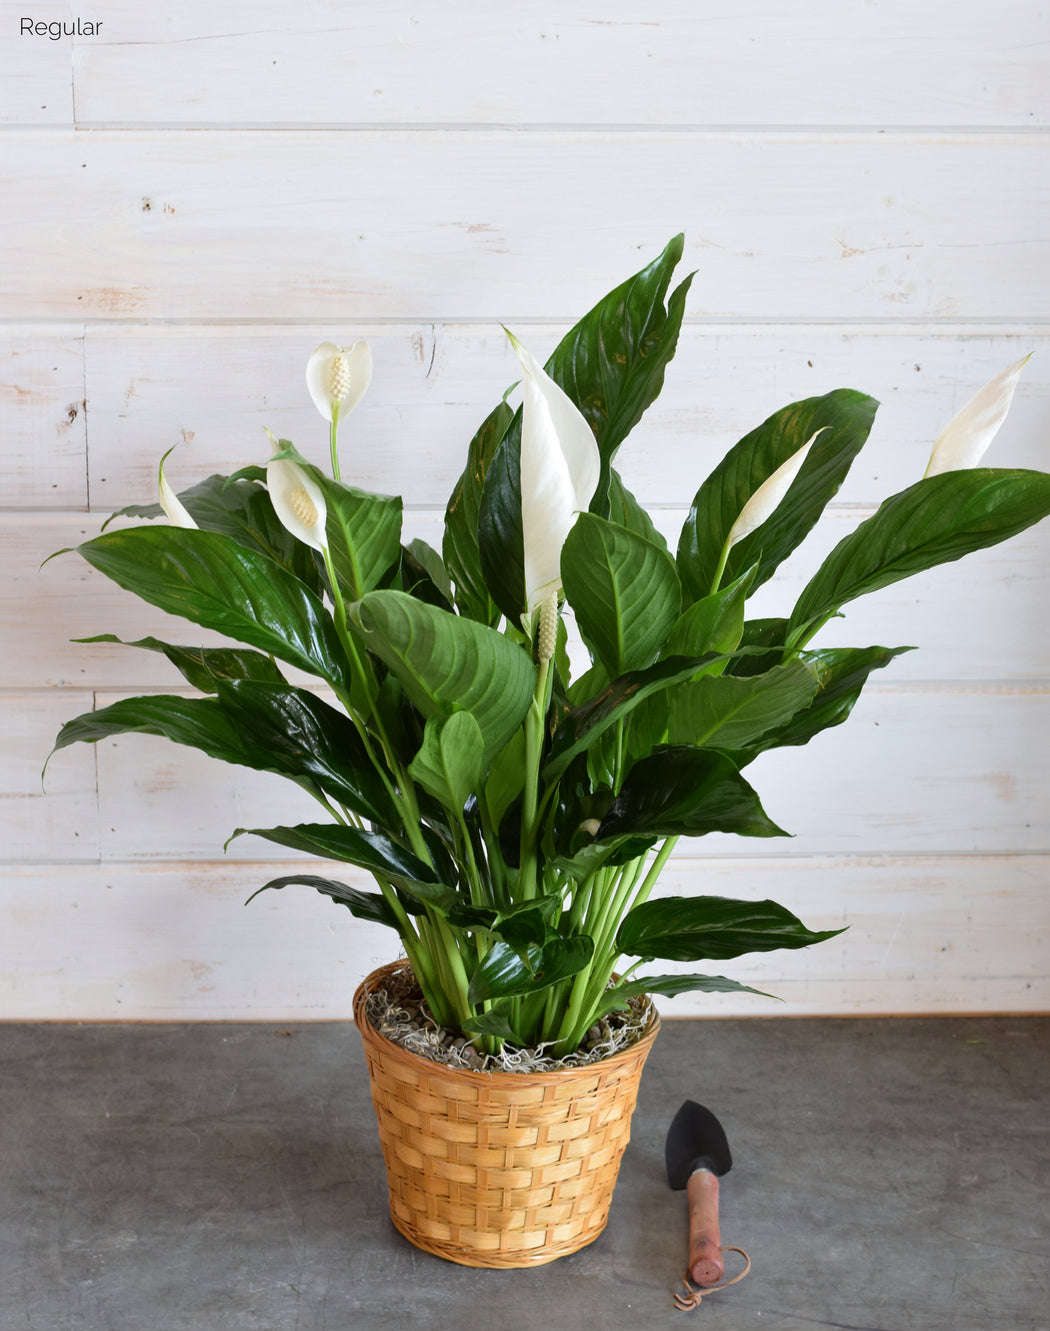 PEACE LILY